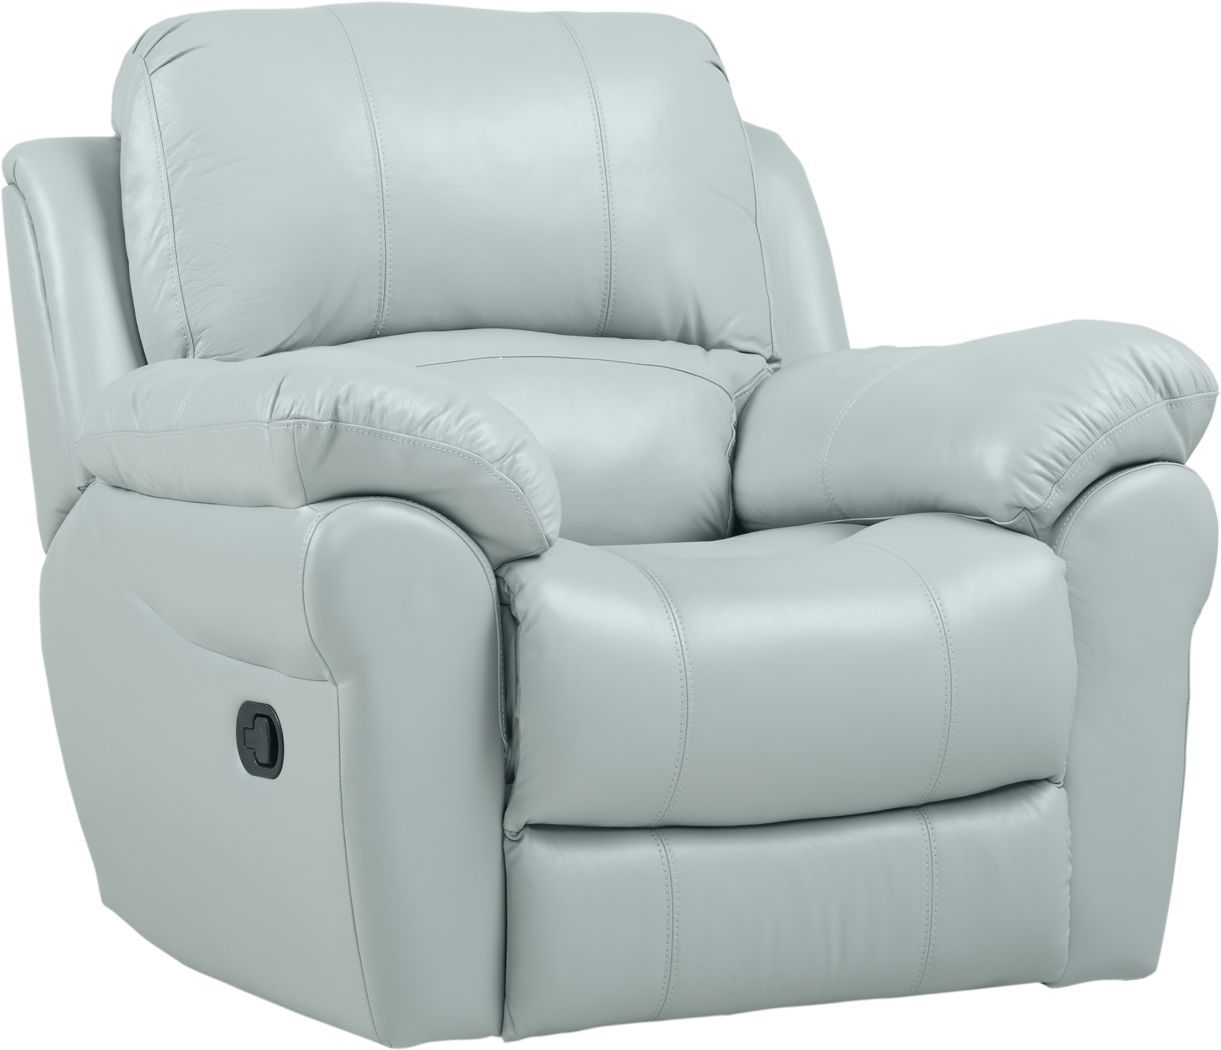 Leather Recliners, Rooms To Go Leather Recliner